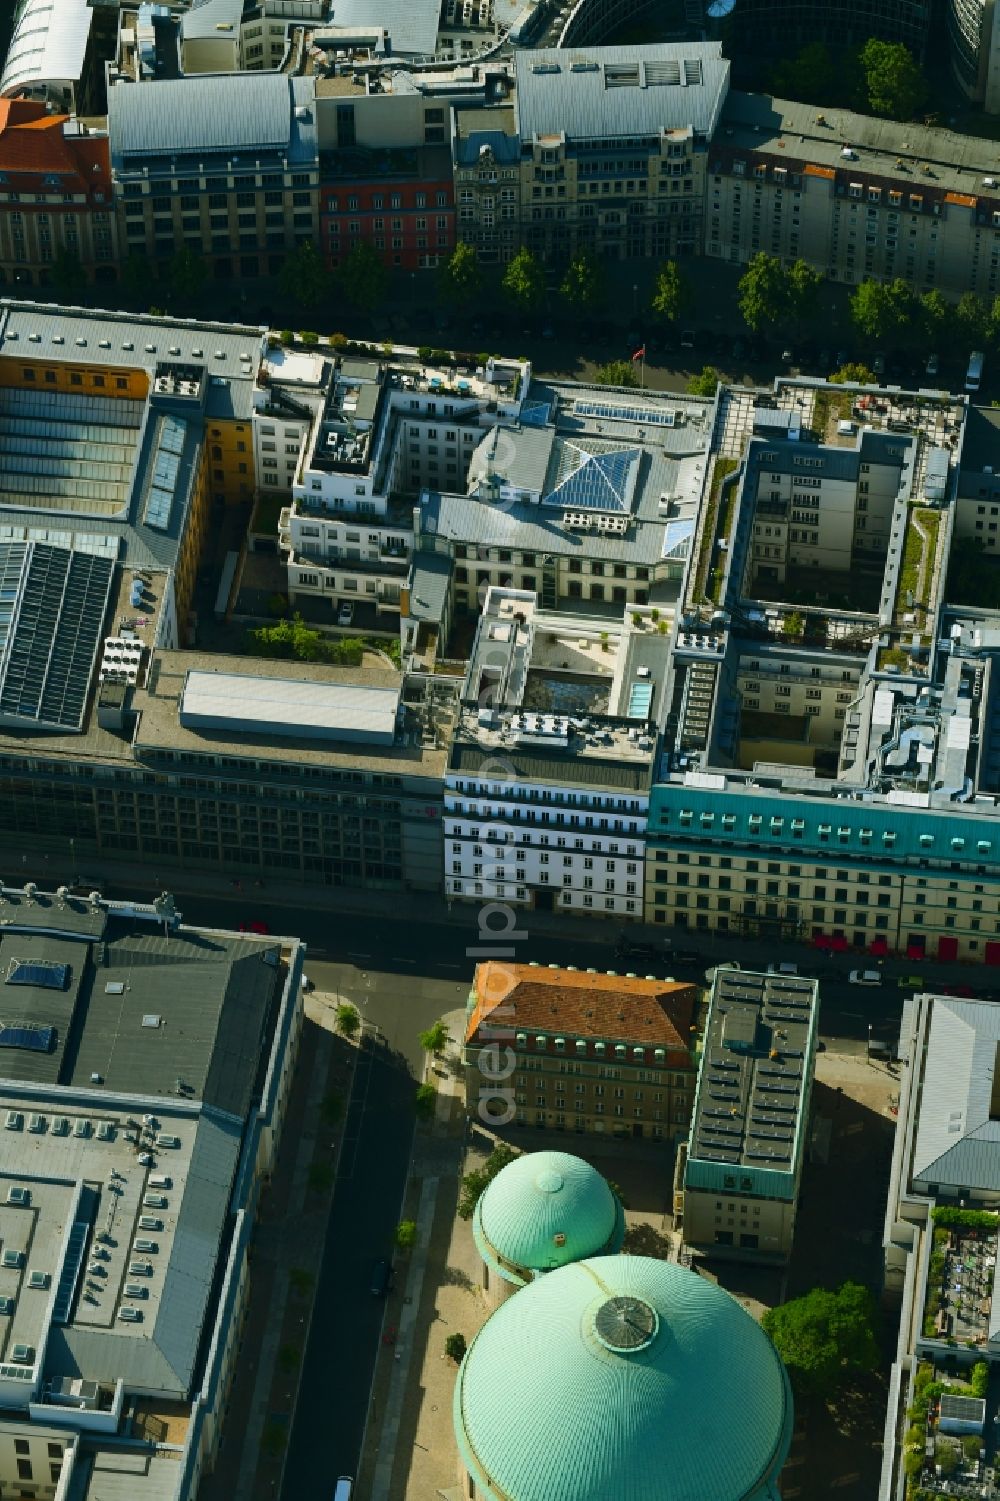 Aerial image Berlin - Office building - Ensemble of Robert Bosch Stiftung GmbH on Franzoesische Strasse - Jaegerstrasse - Hedwigskirchgasse in the district Mitte in Berlin, Germany